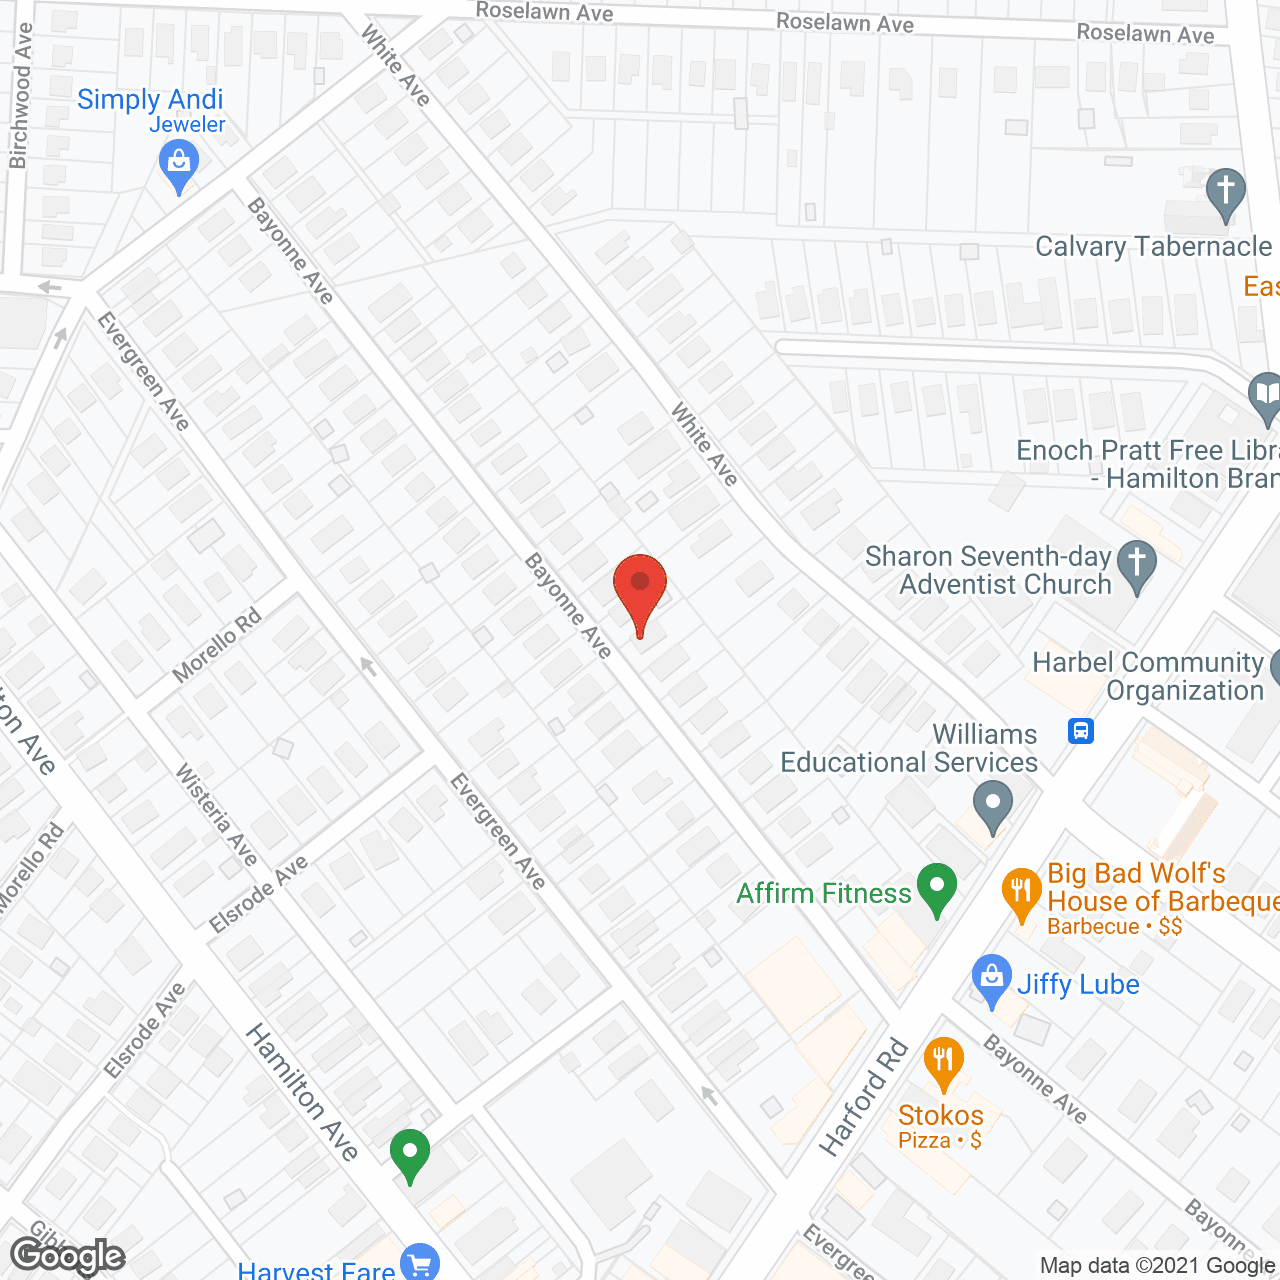 We Care First, LLC in google map